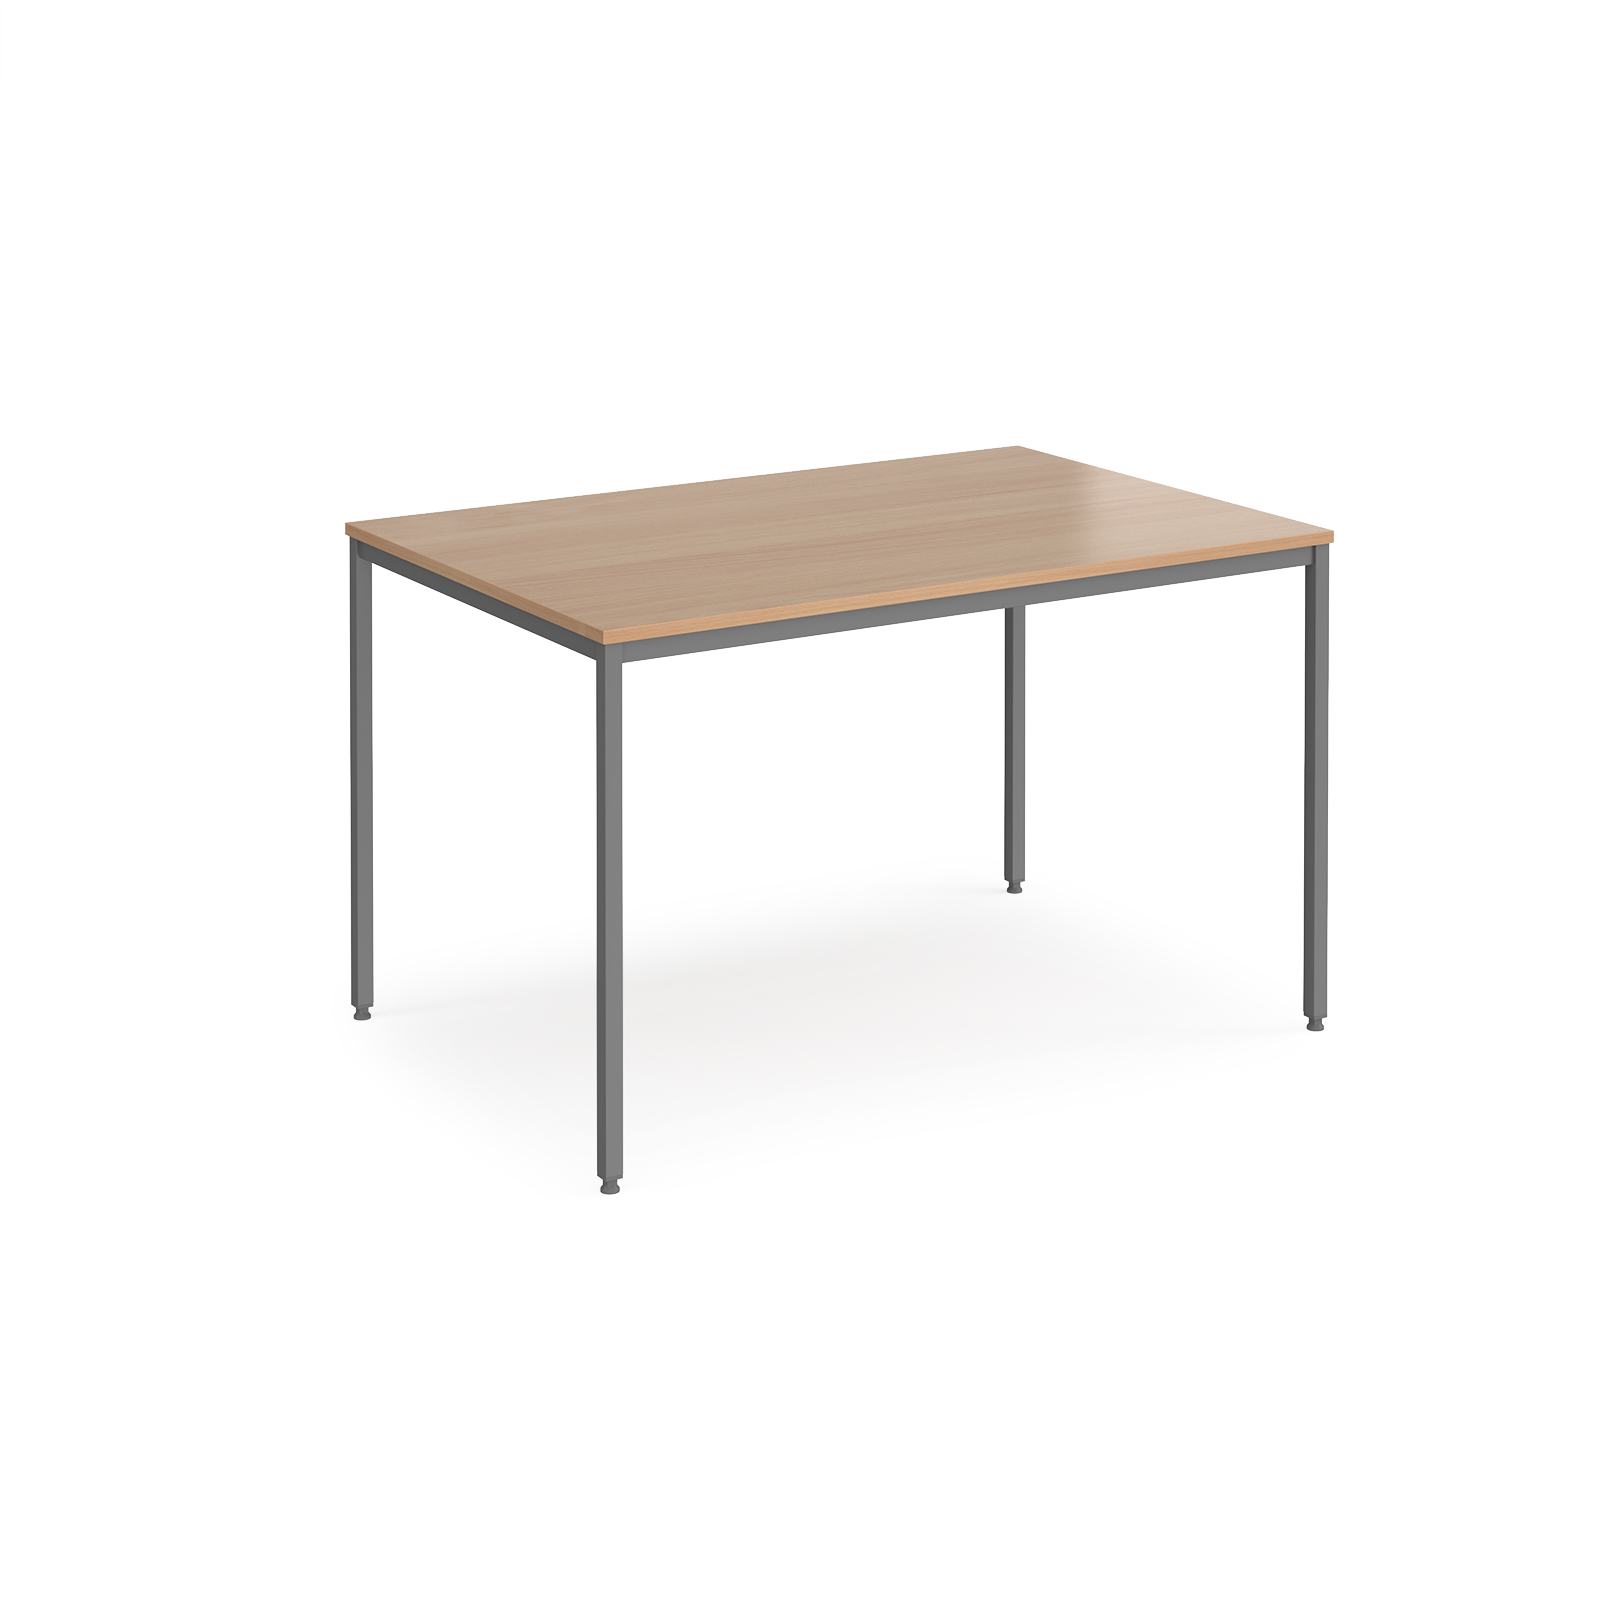 Rectangular flexi table with graphite frame 1200mm x 800mm - beech